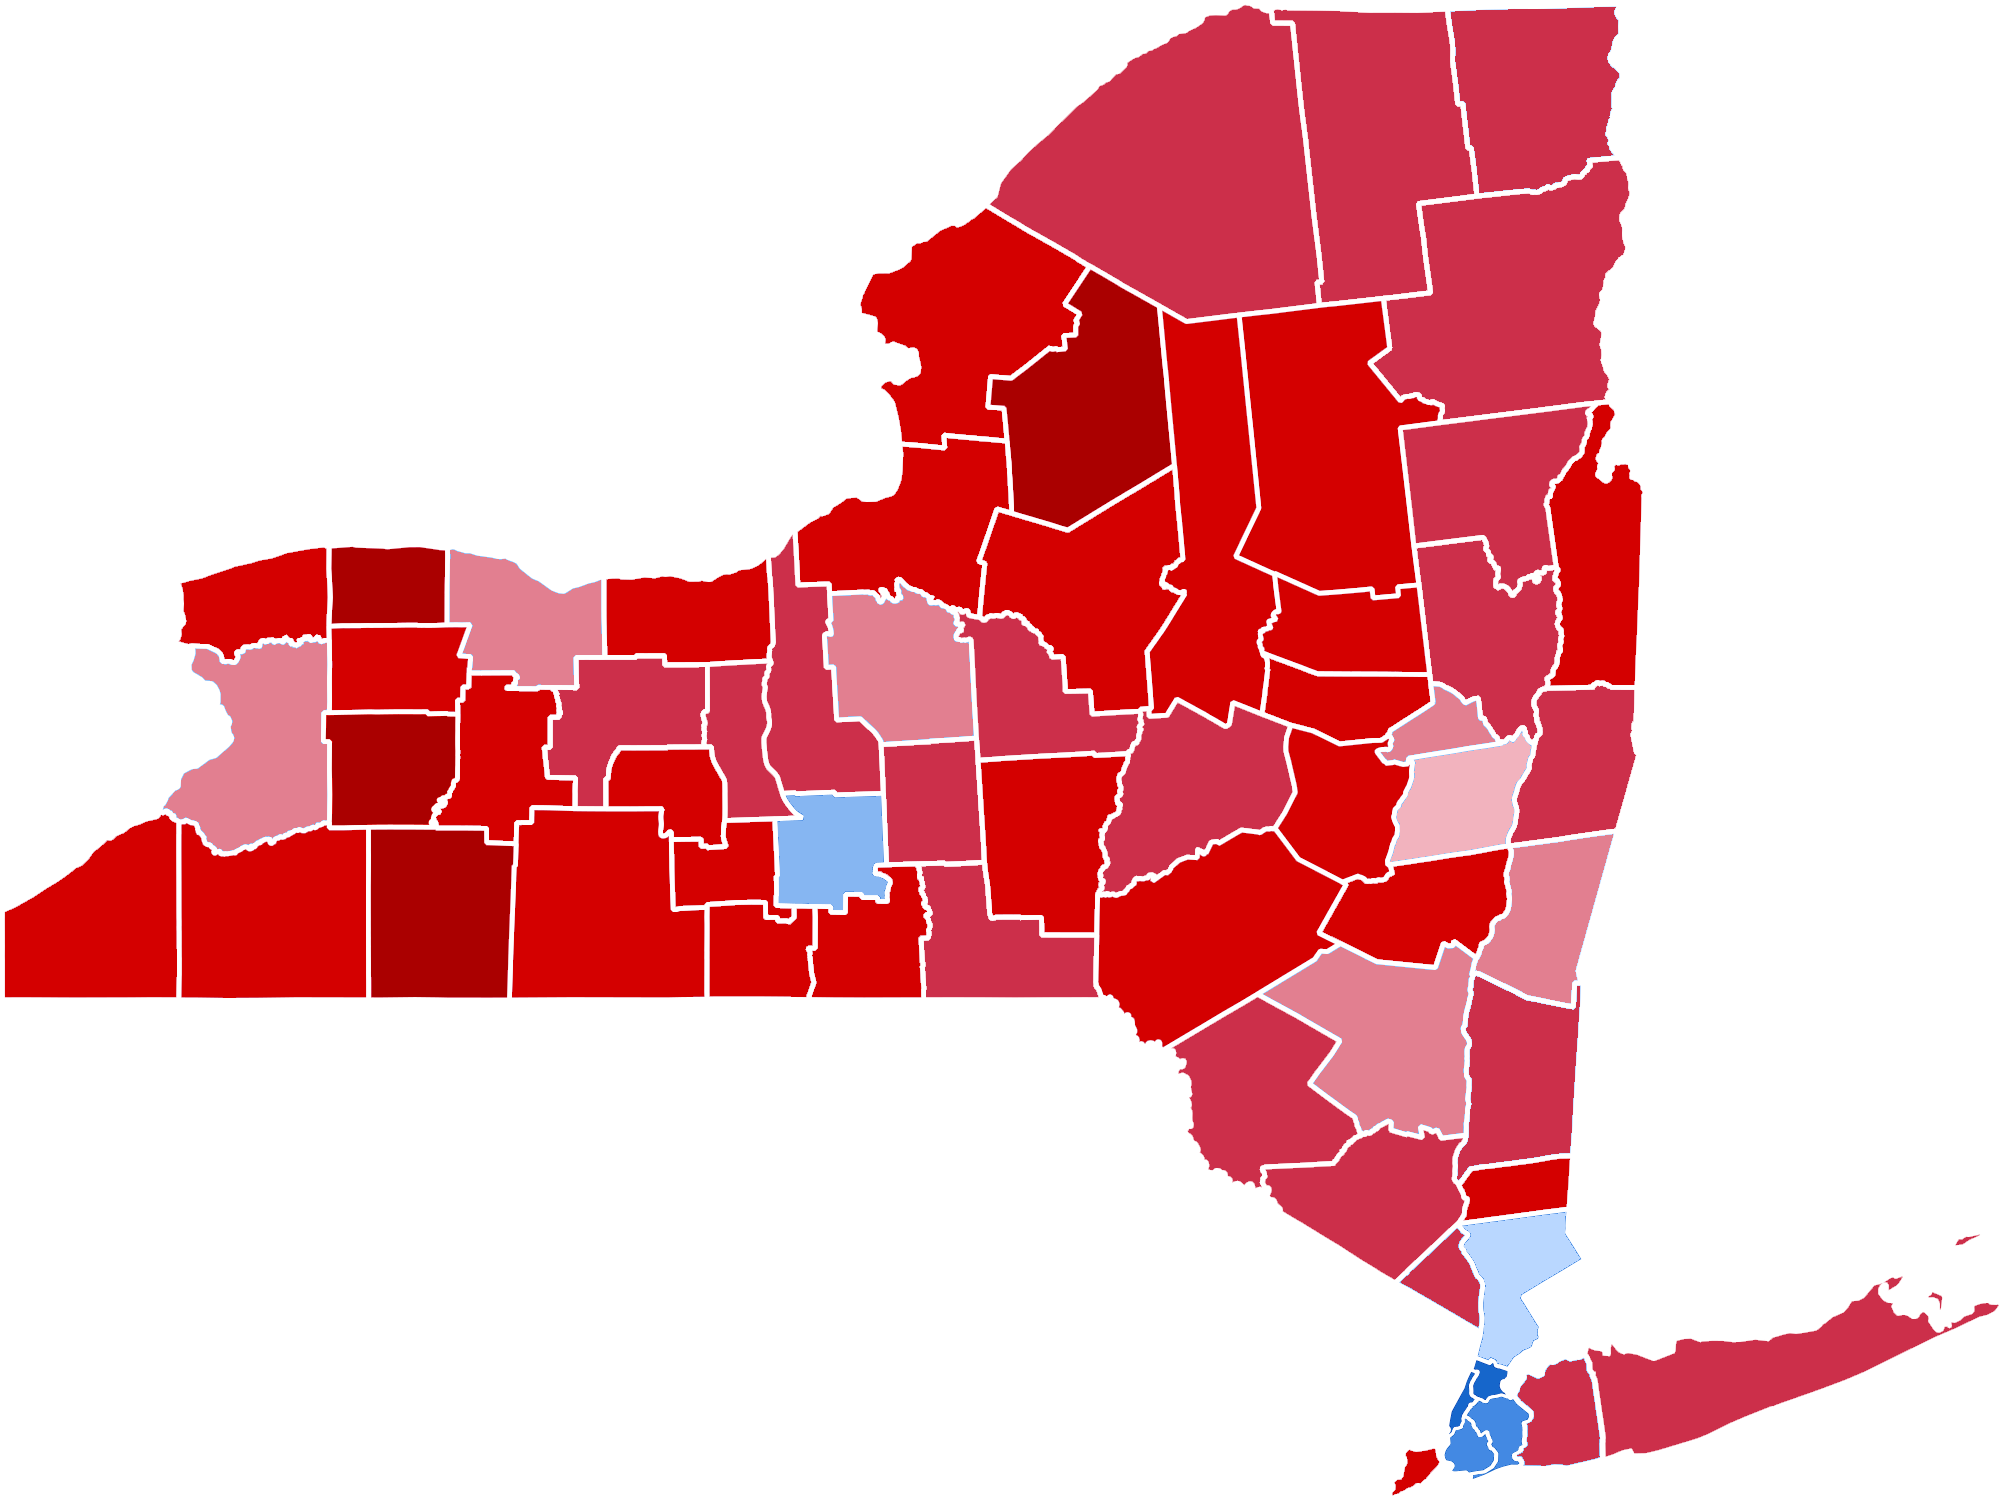 2000px-New_York_Presidential_Election_Results_2016_Republican_Landslide_15.06%.png